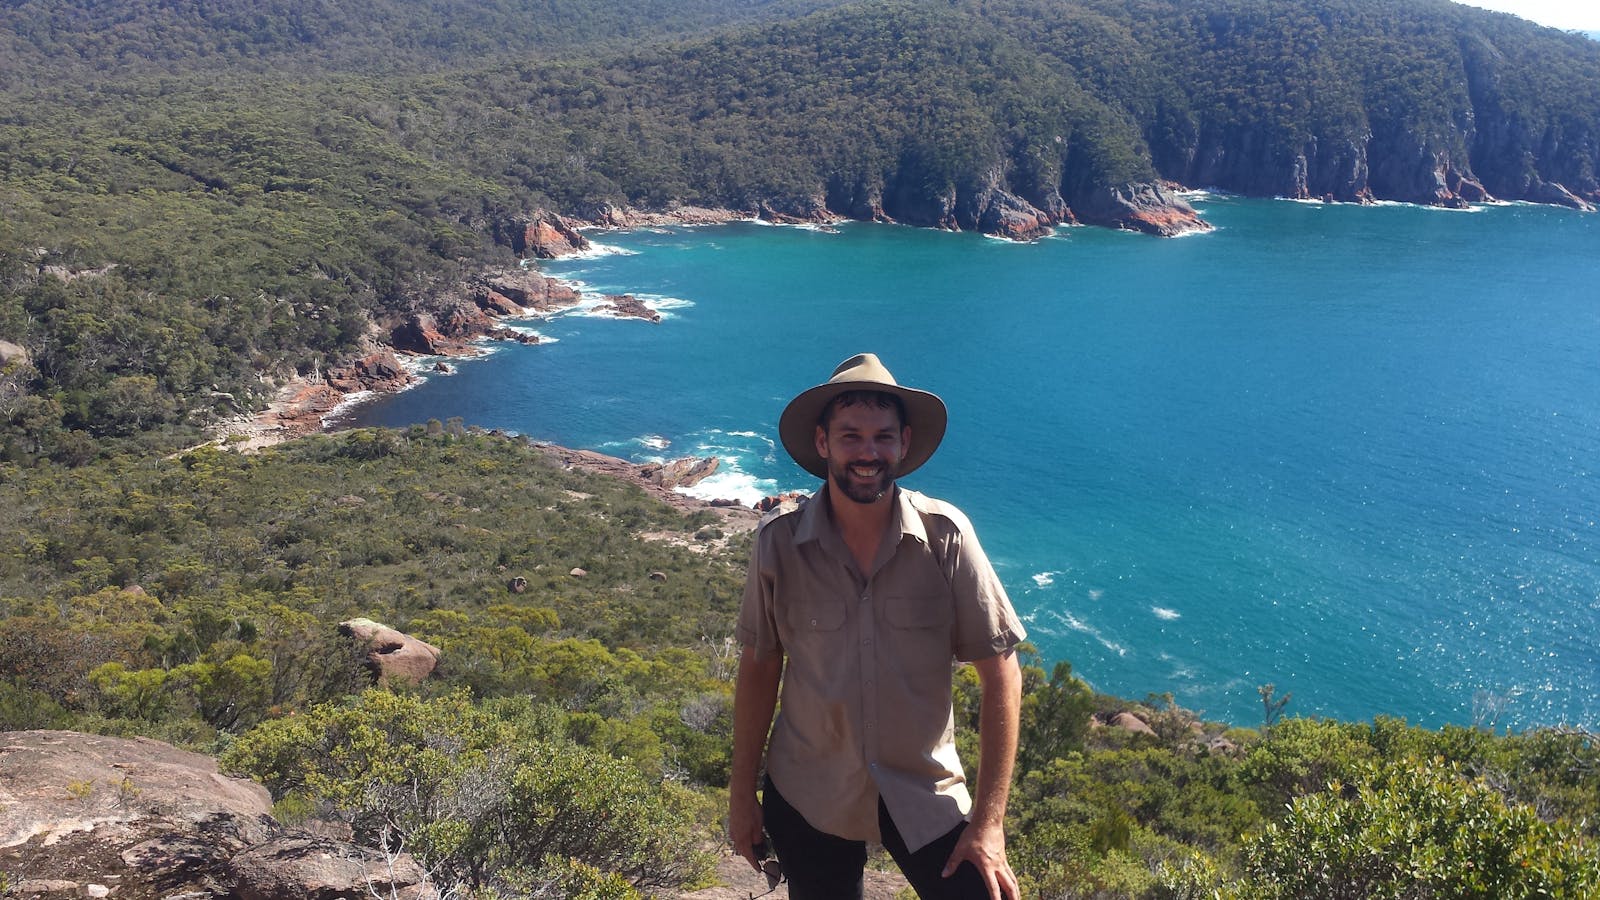 Views to keep you smiling on the Freycinet & Wineglass Bay pack-free walk by Life's An Adventure